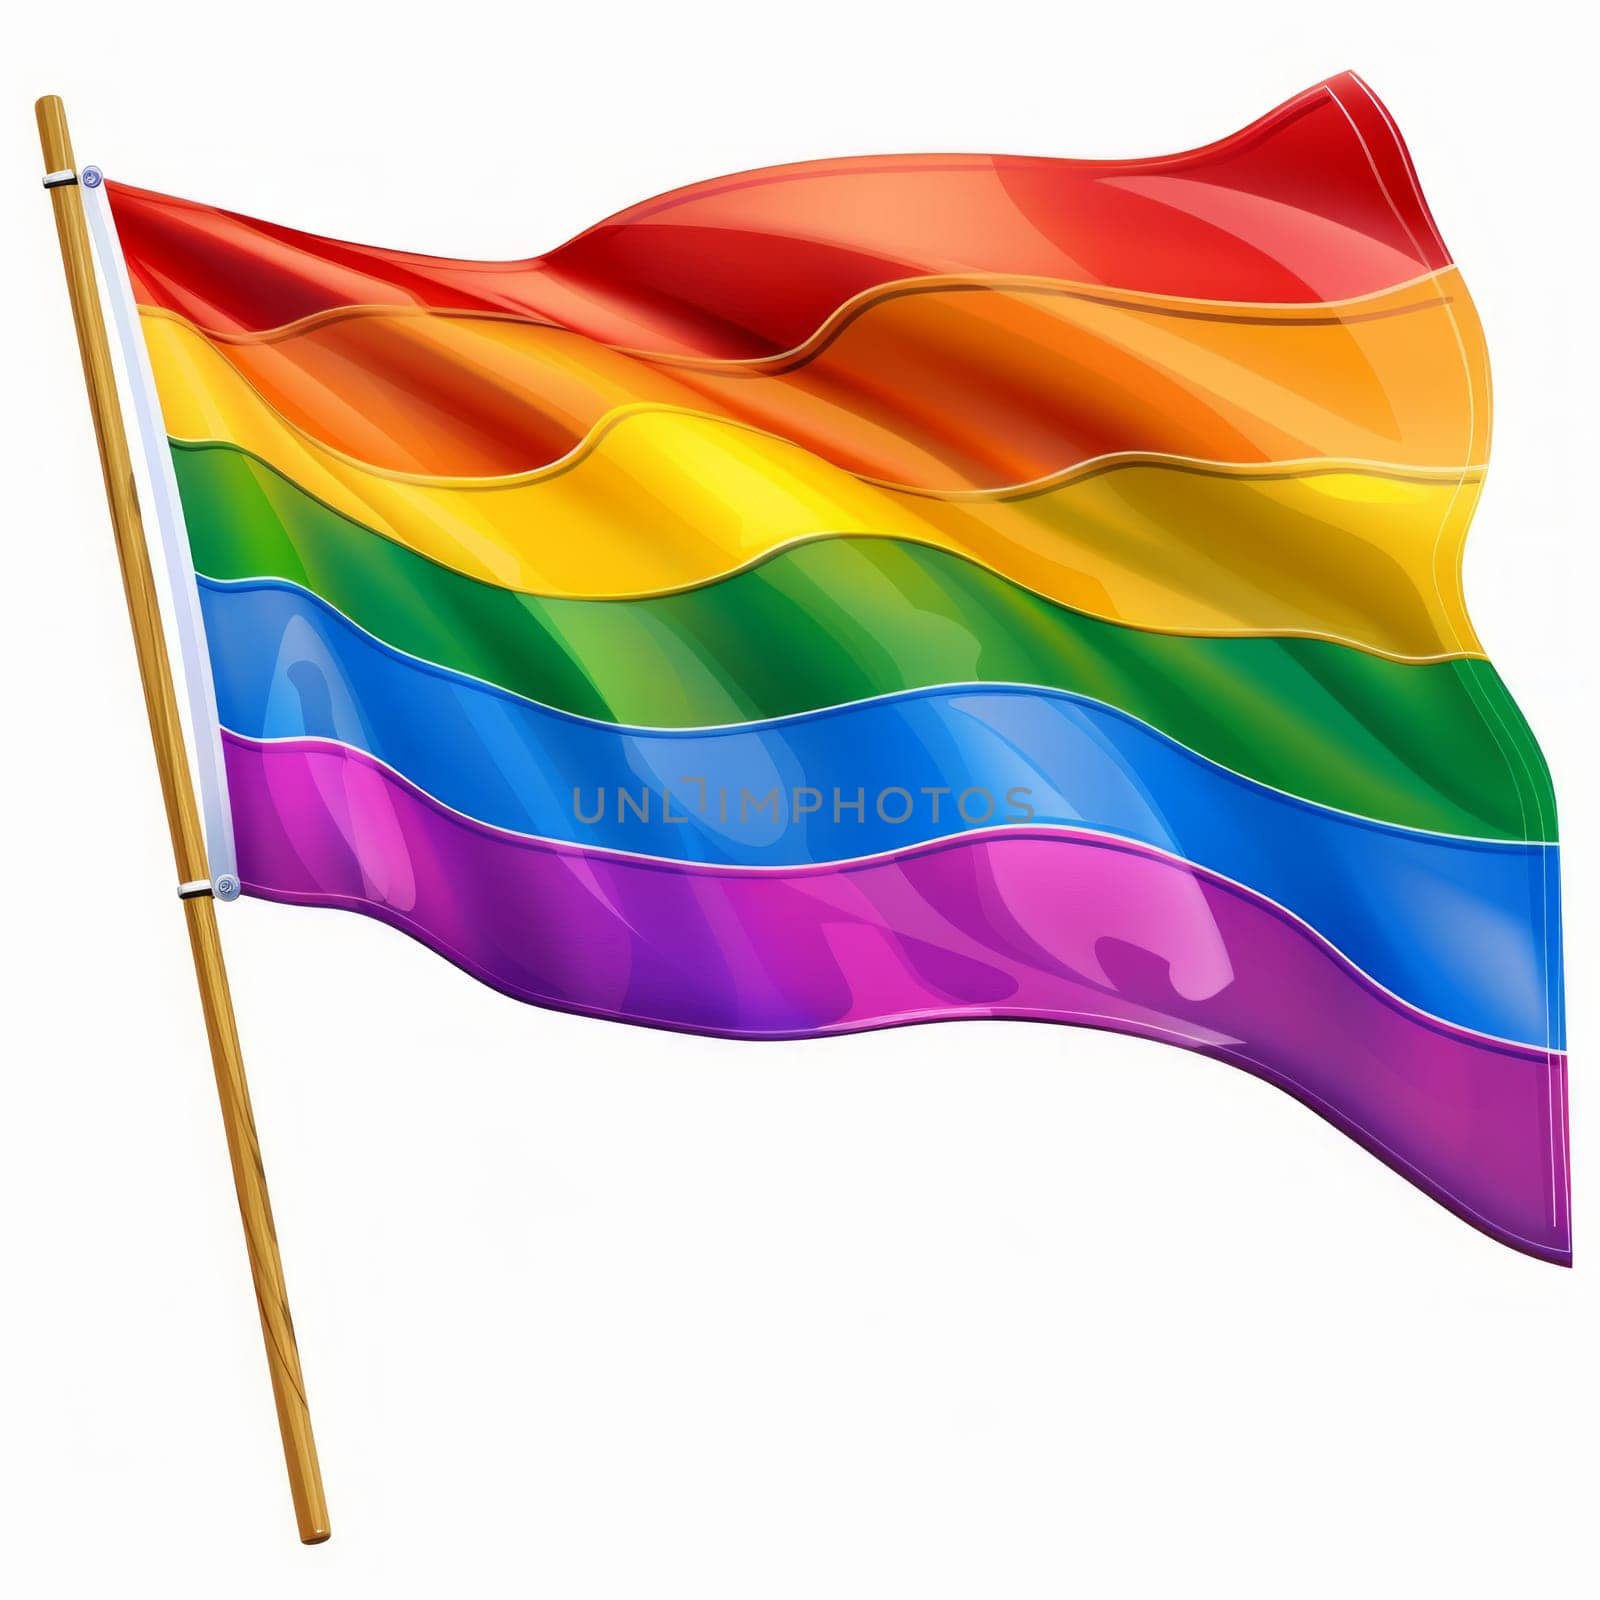 A rainbow flag waving on white background. Concepts of diversity and inclusivity of the LGBTQ community.